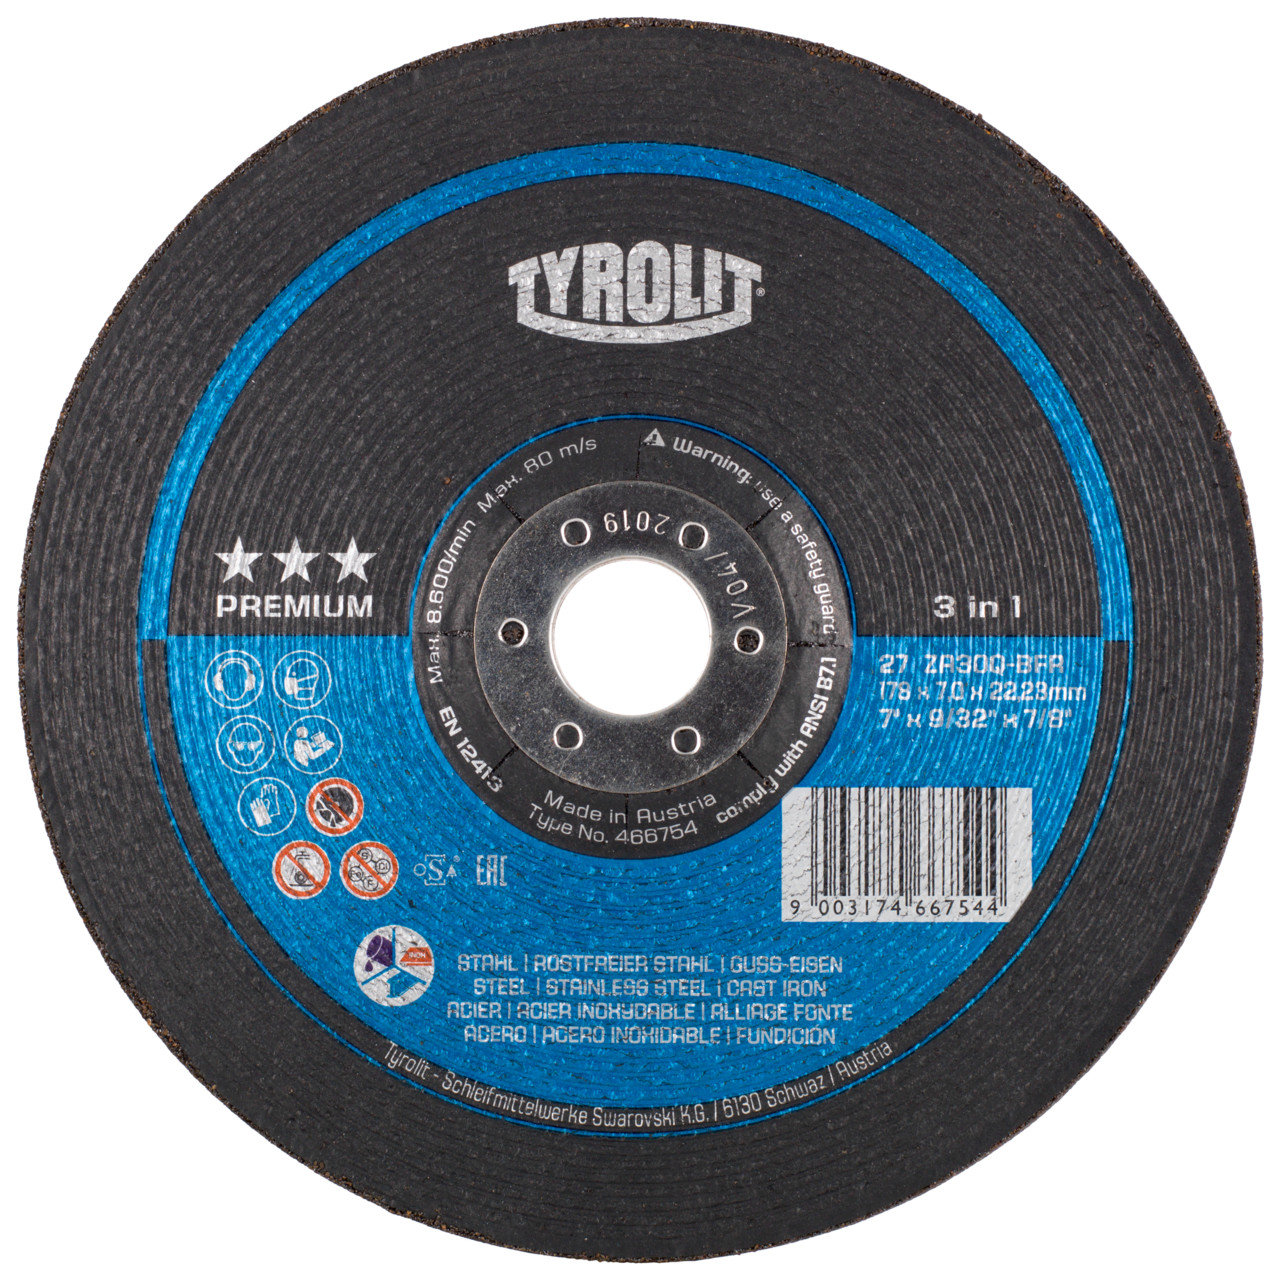 TYROLIT grinding disc DxUxH 115x7x22.23 3in1 for steel and stainless steel and cast iron, shape: 27 - offset version, Art. 466744